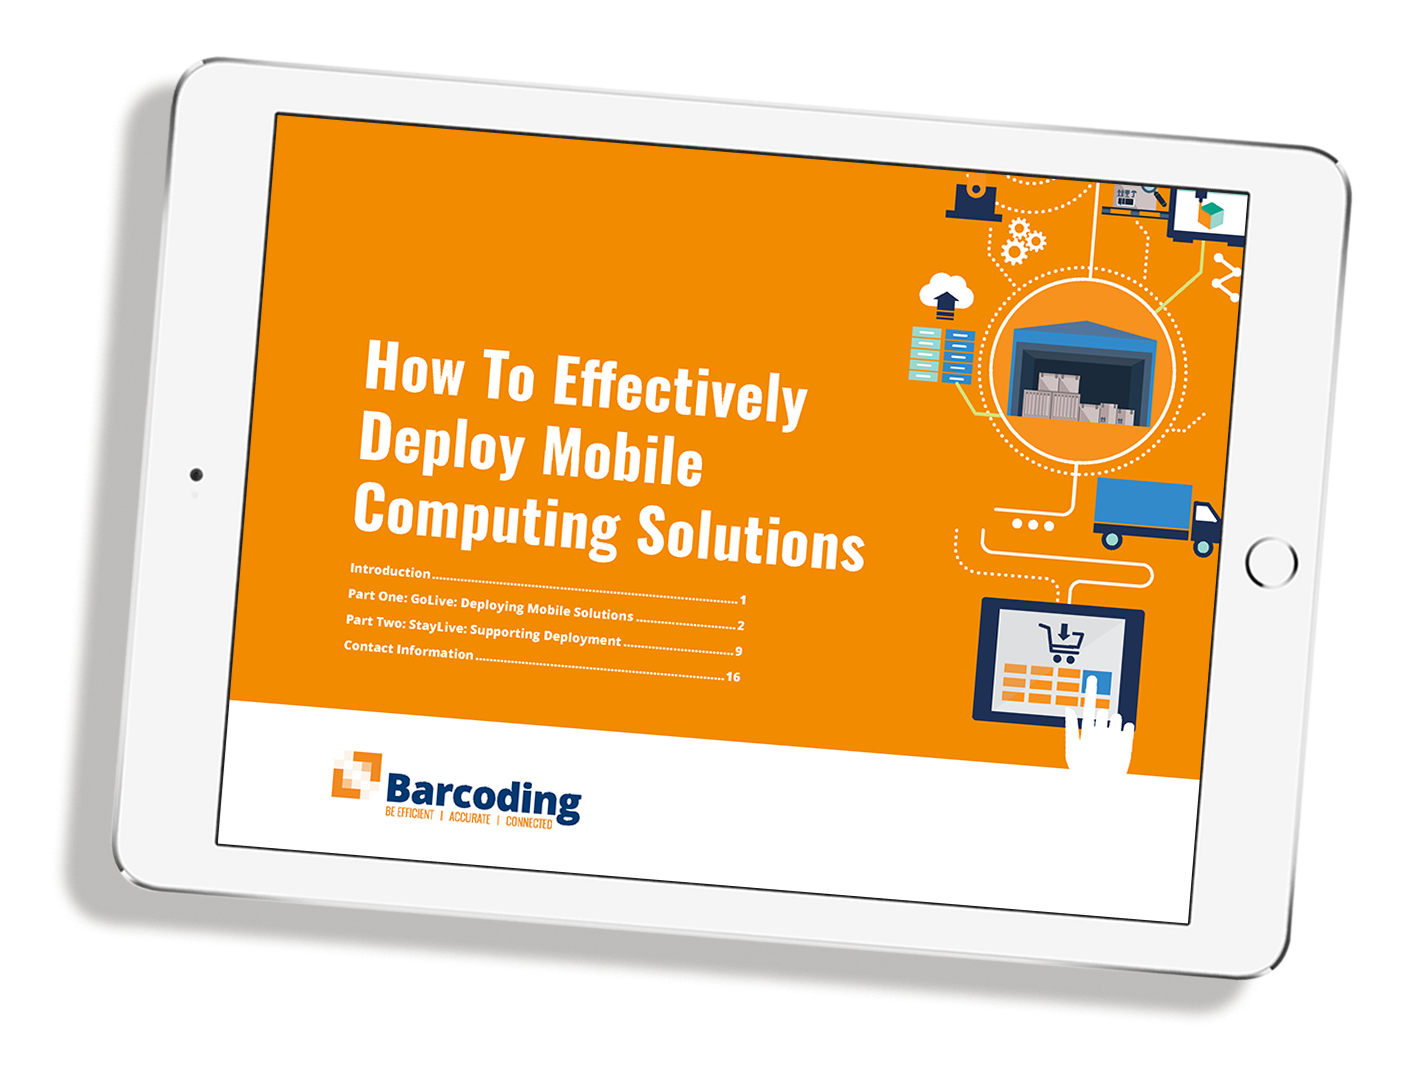 How to effectively deploy mobile computing solutions ipad